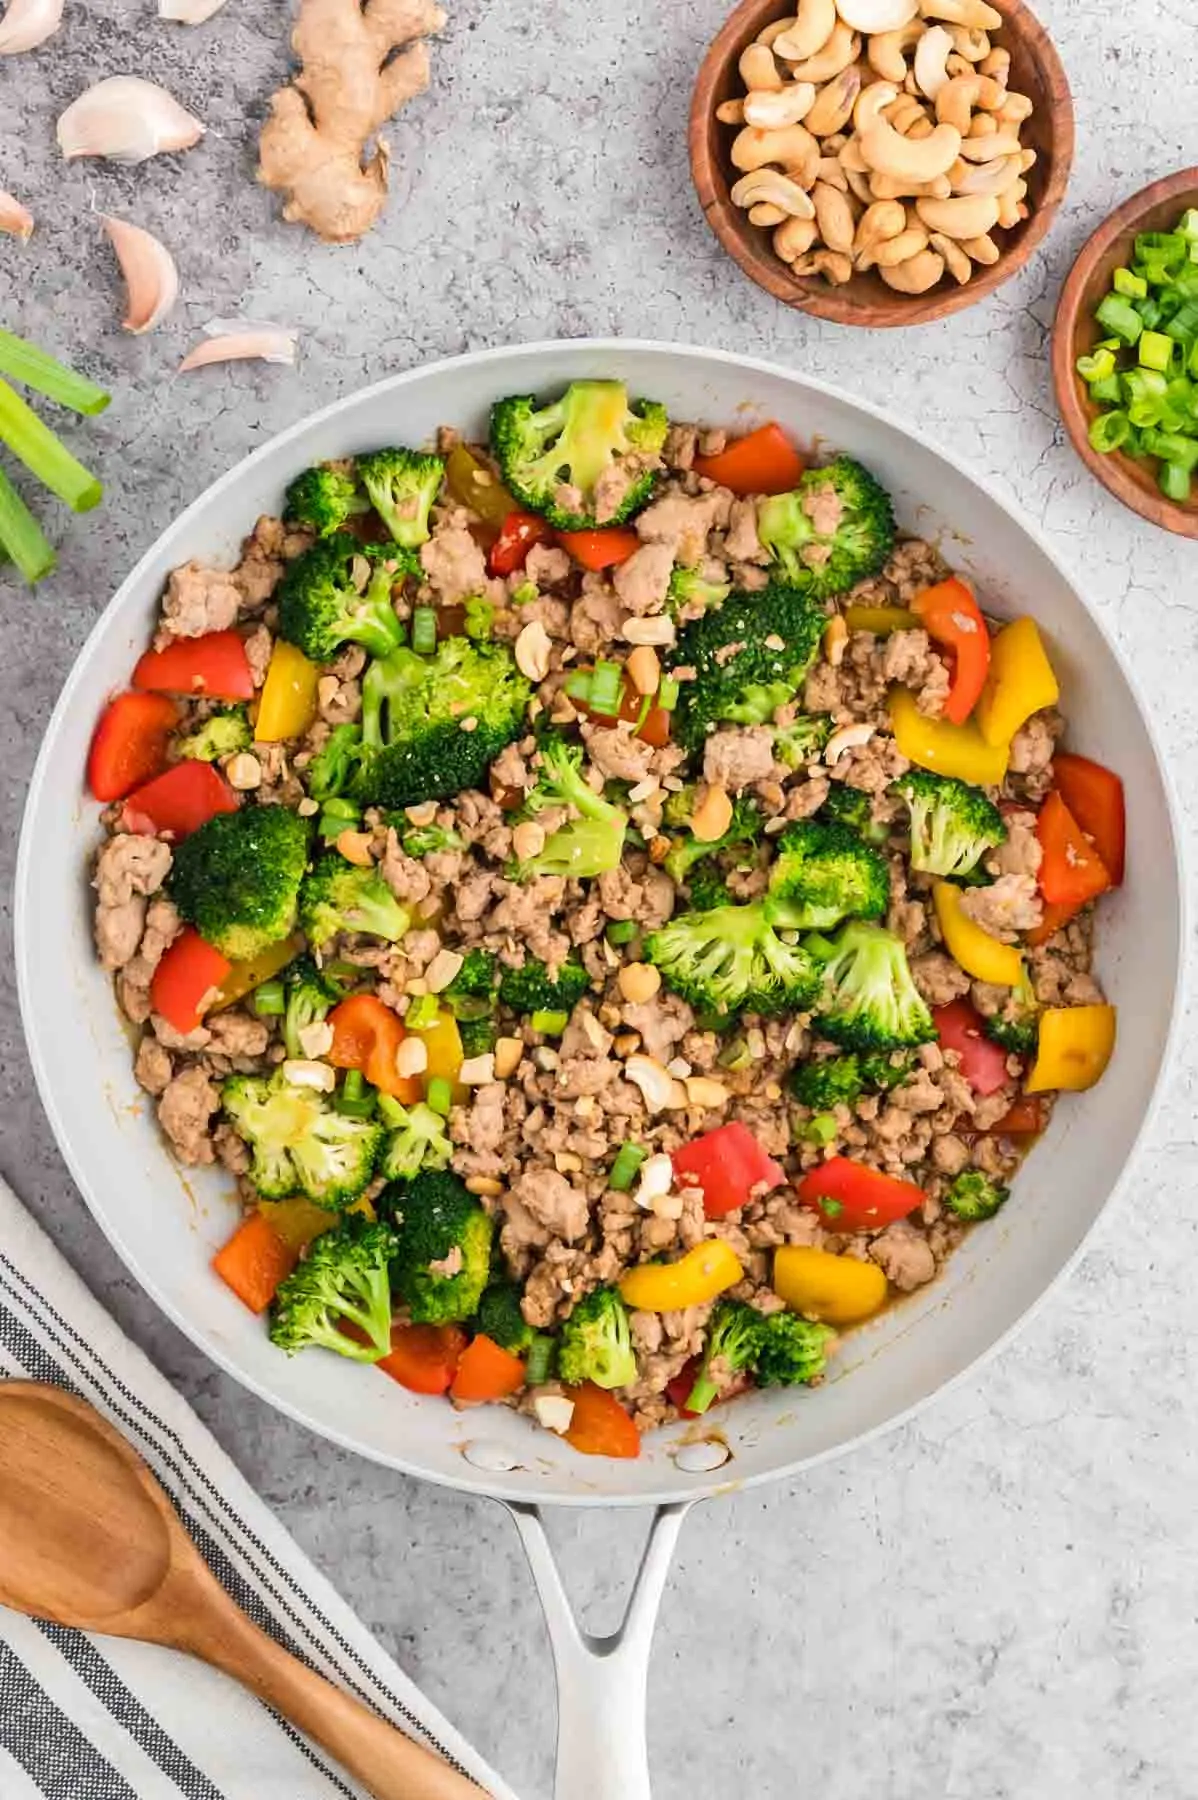 Ground Turkey Stir Fry is an easy weeknight dinner recipe loaded with bell peppers, broccoli, green onions and cashews all cooked in a sweet and savoury stir fry sauce seasoned with fresh garlic and ginger.